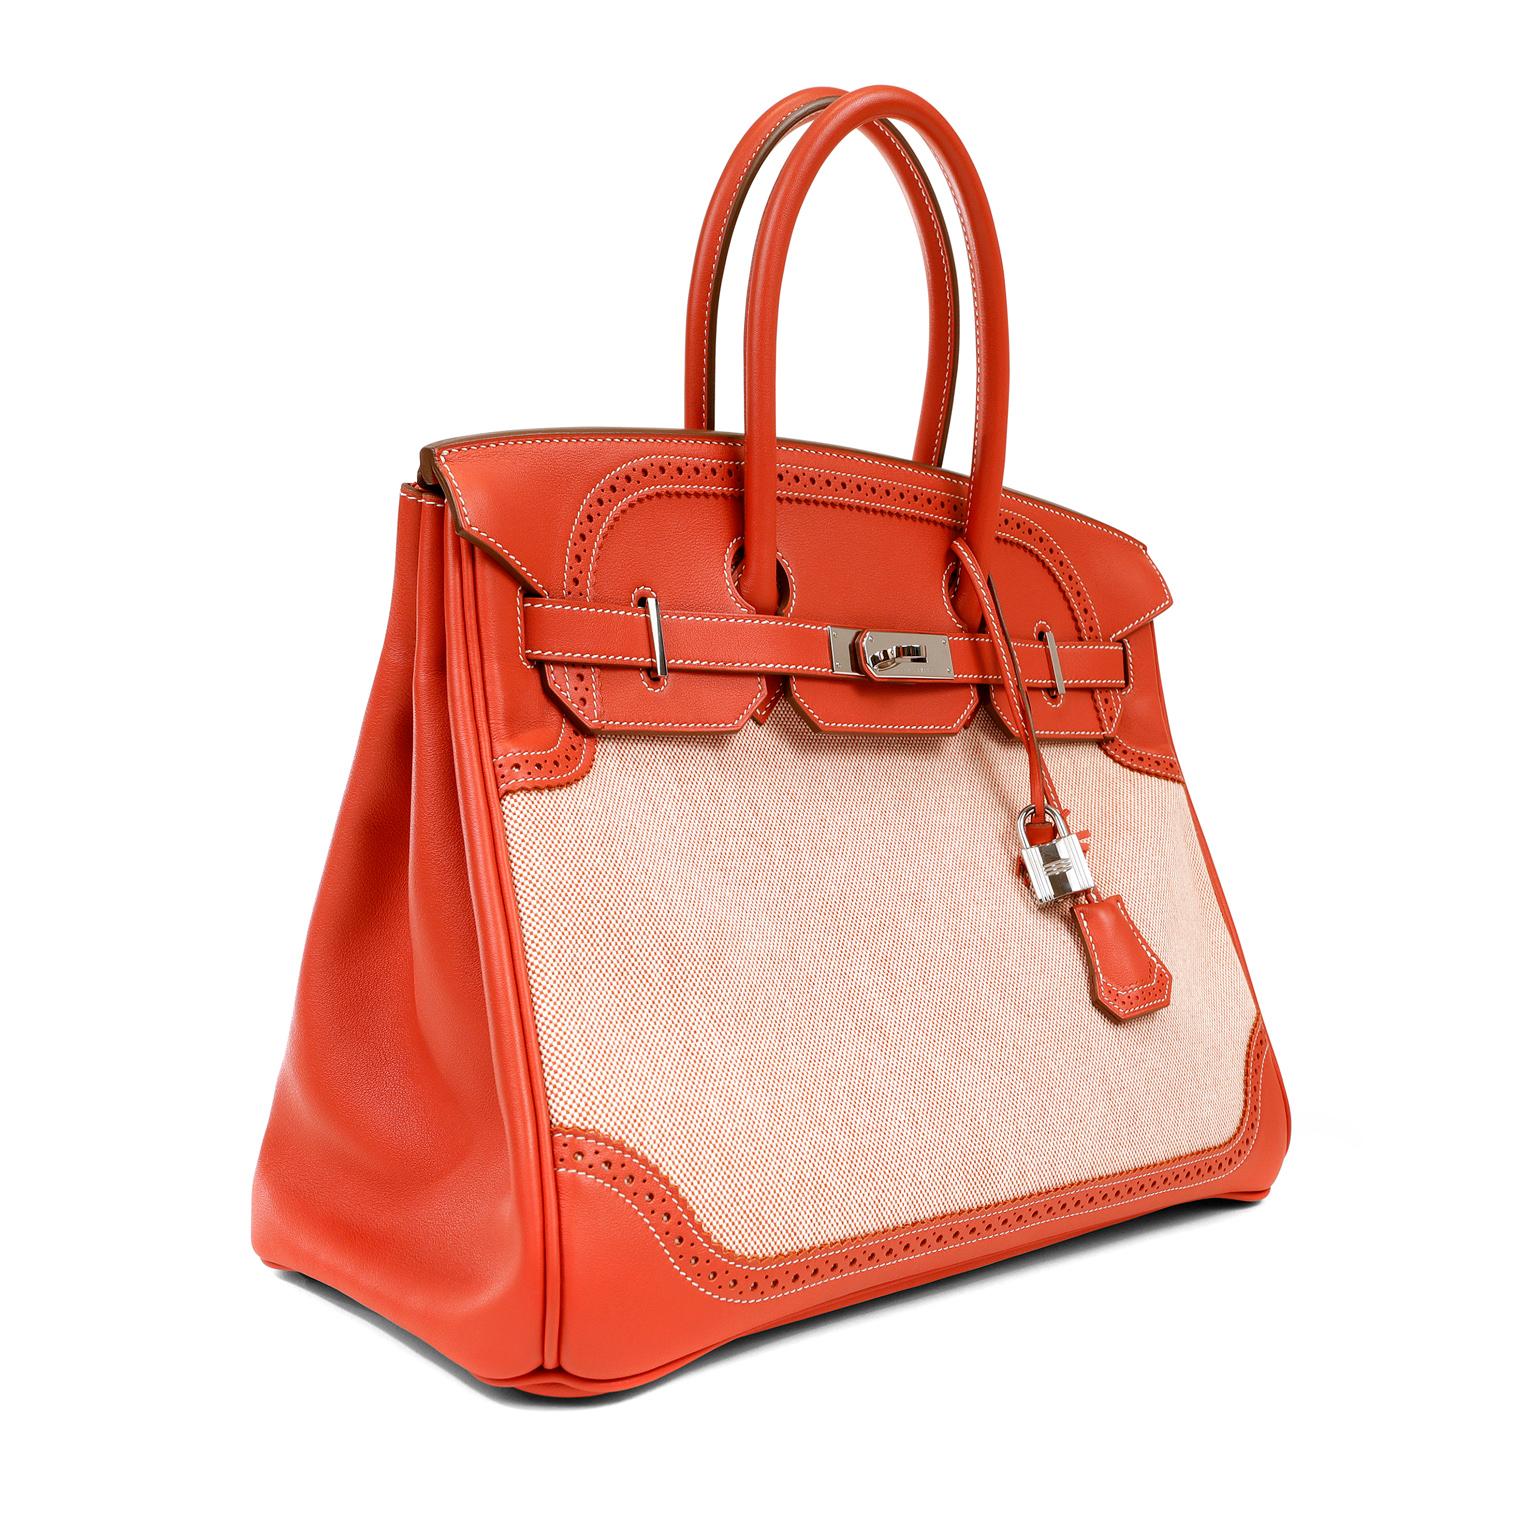 This authentic Hermès Rose Tea Ghillies 35 cm Birkin is in pristine condition. Hermès bags are considered the ultimate luxury item the world over.  Hand stitched by skilled craftsmen, wait lists of a year or more are commonplace. This particular